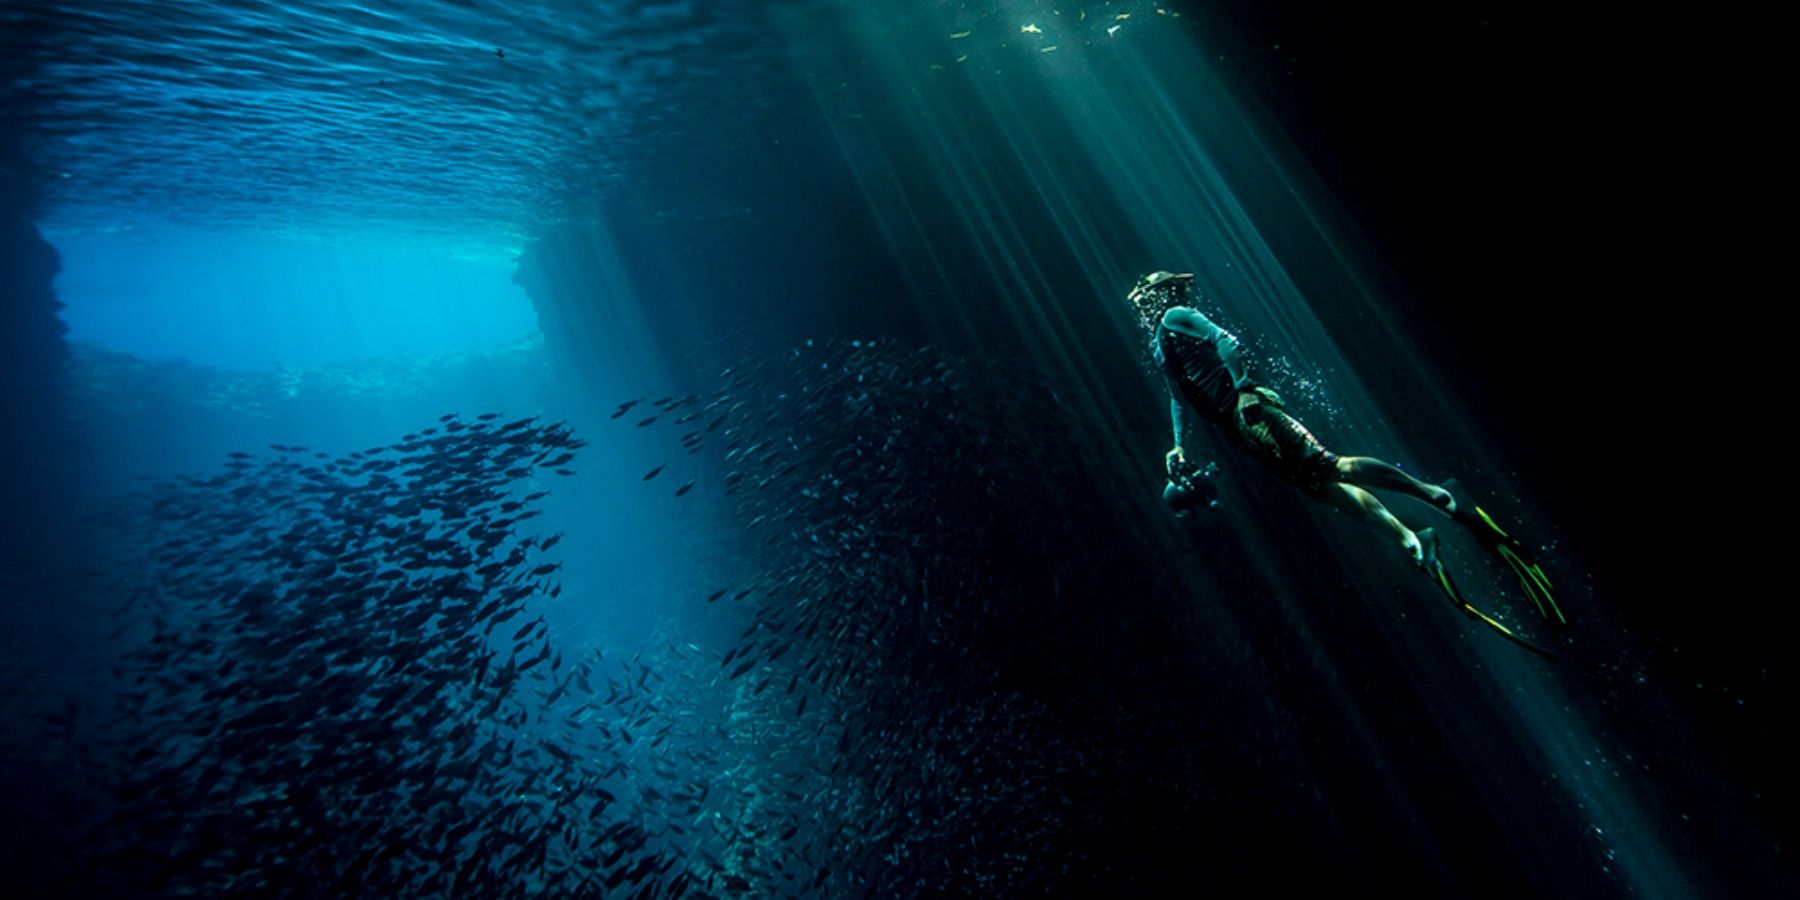 Nature Documentary Tales By Light under the water